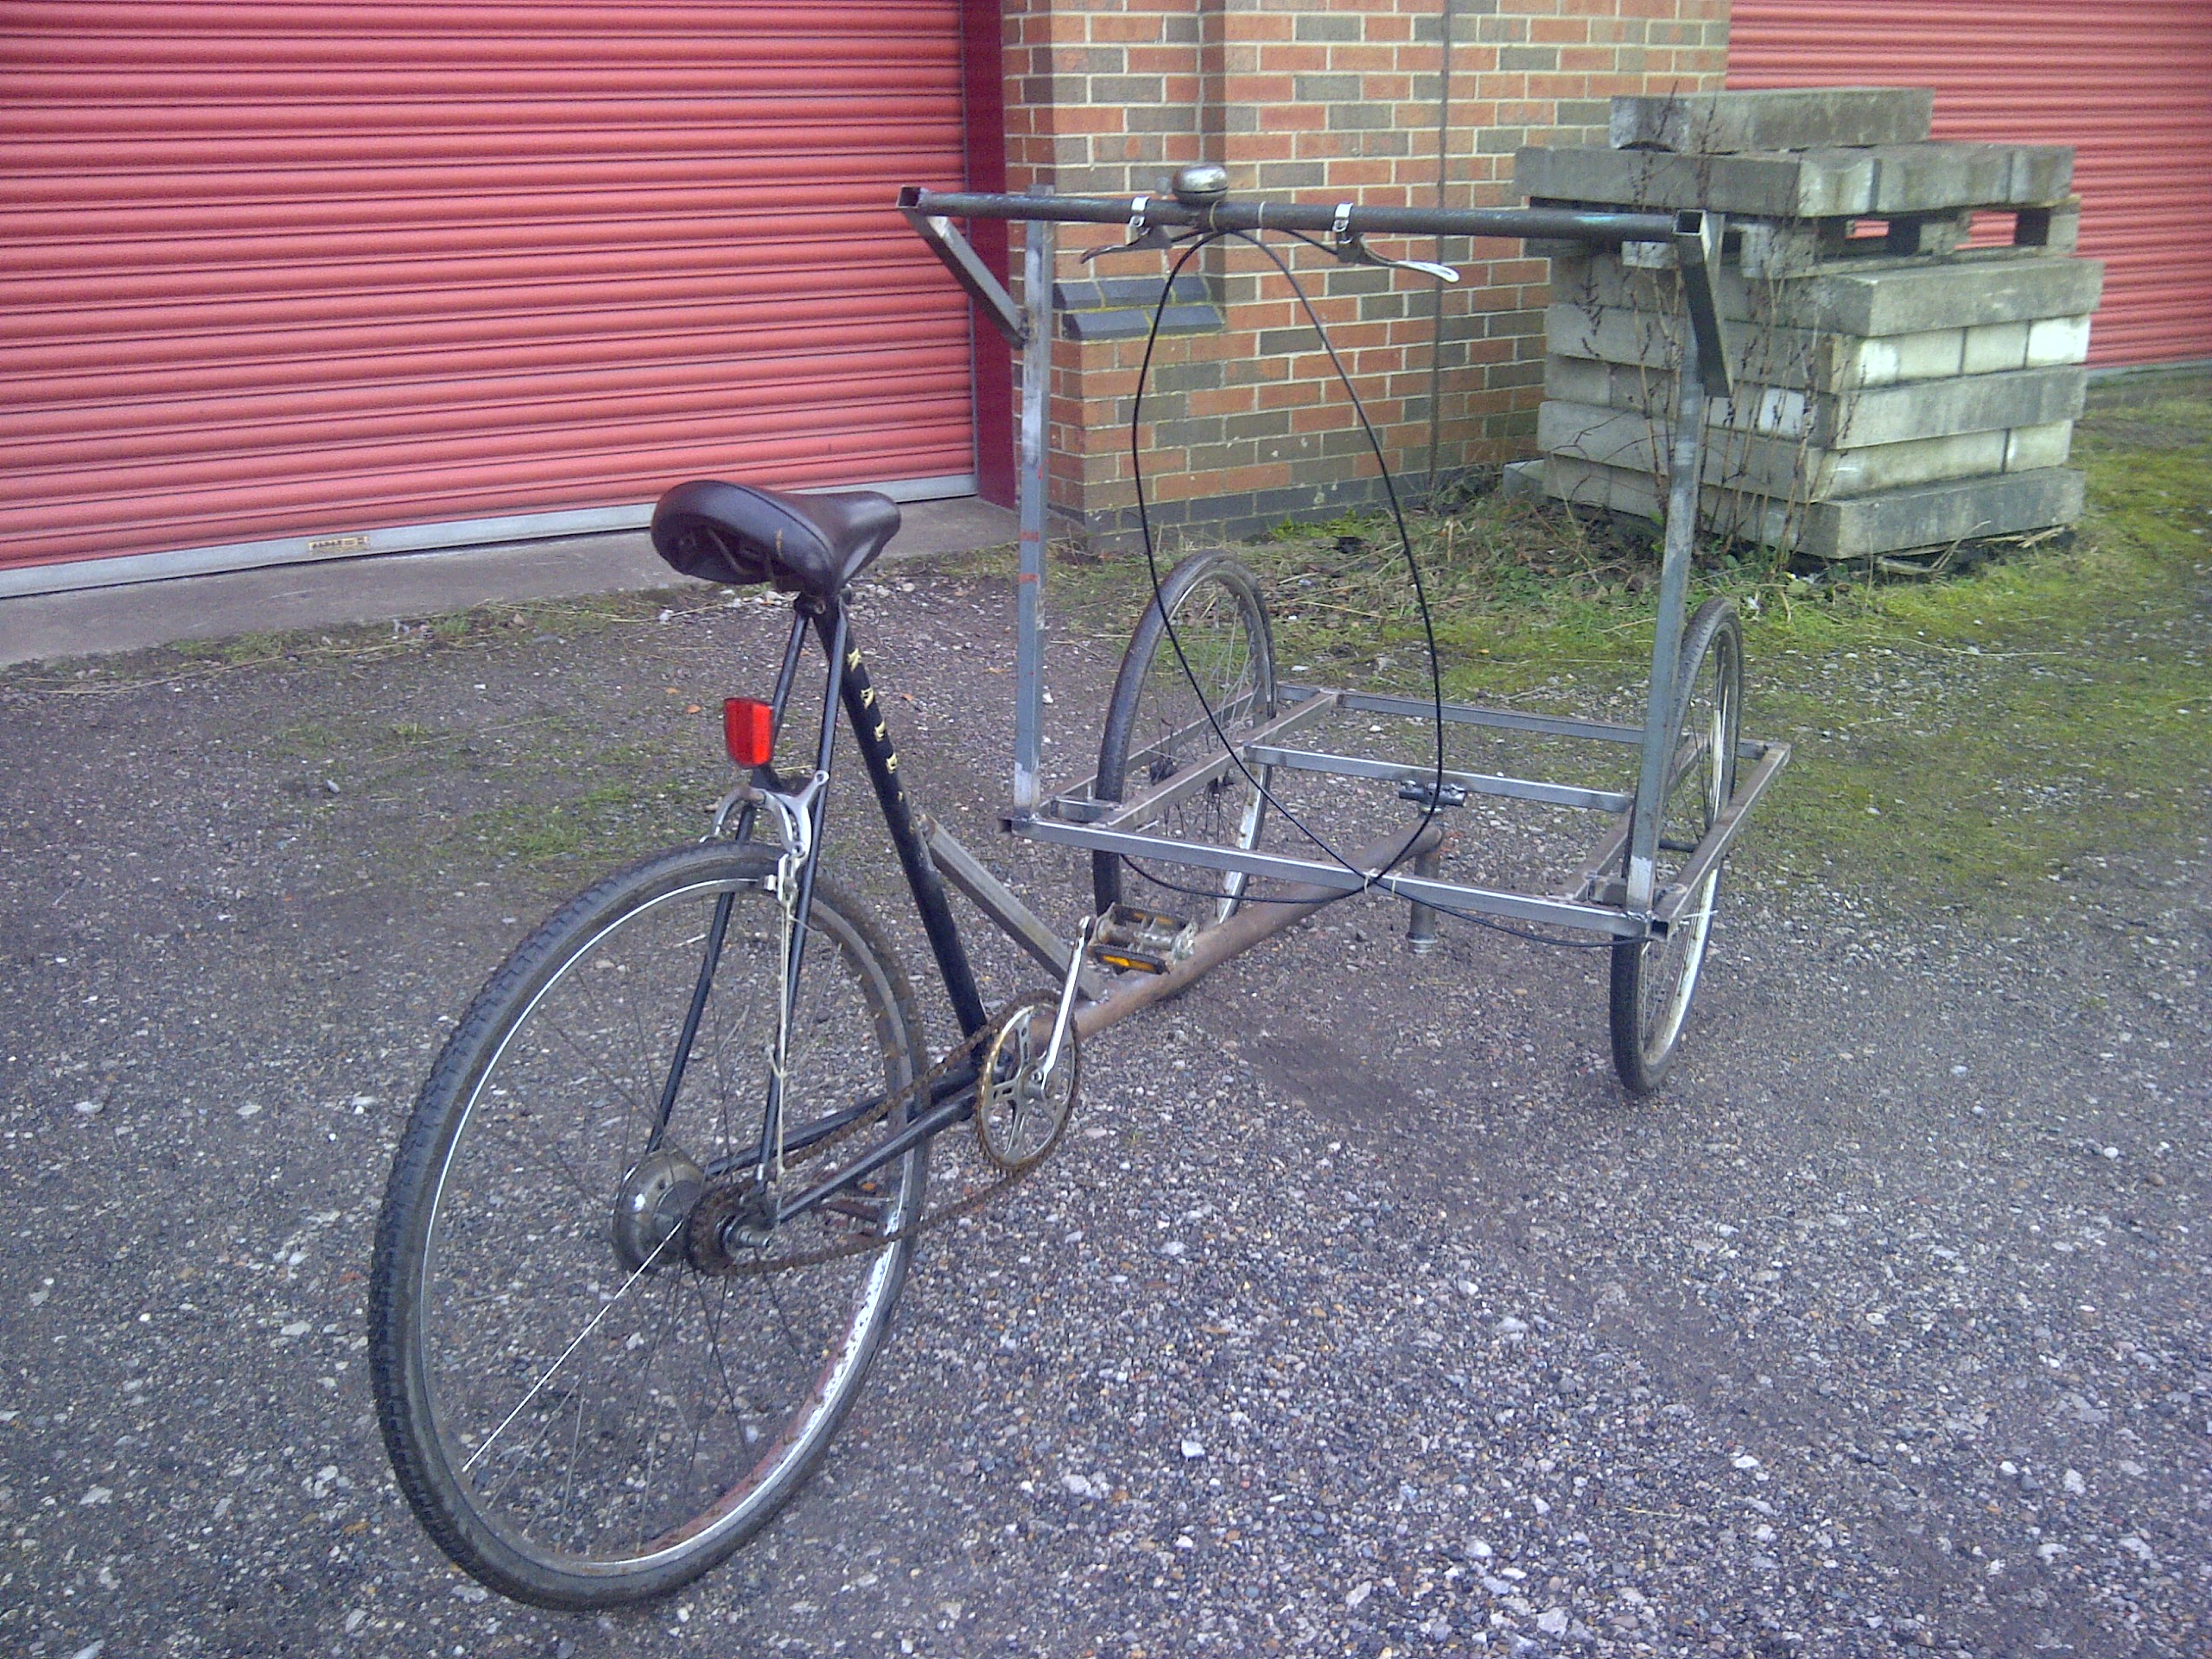 The handlebar was made from steel tube and the brakes were added from the original bikes but fitted with new cables.